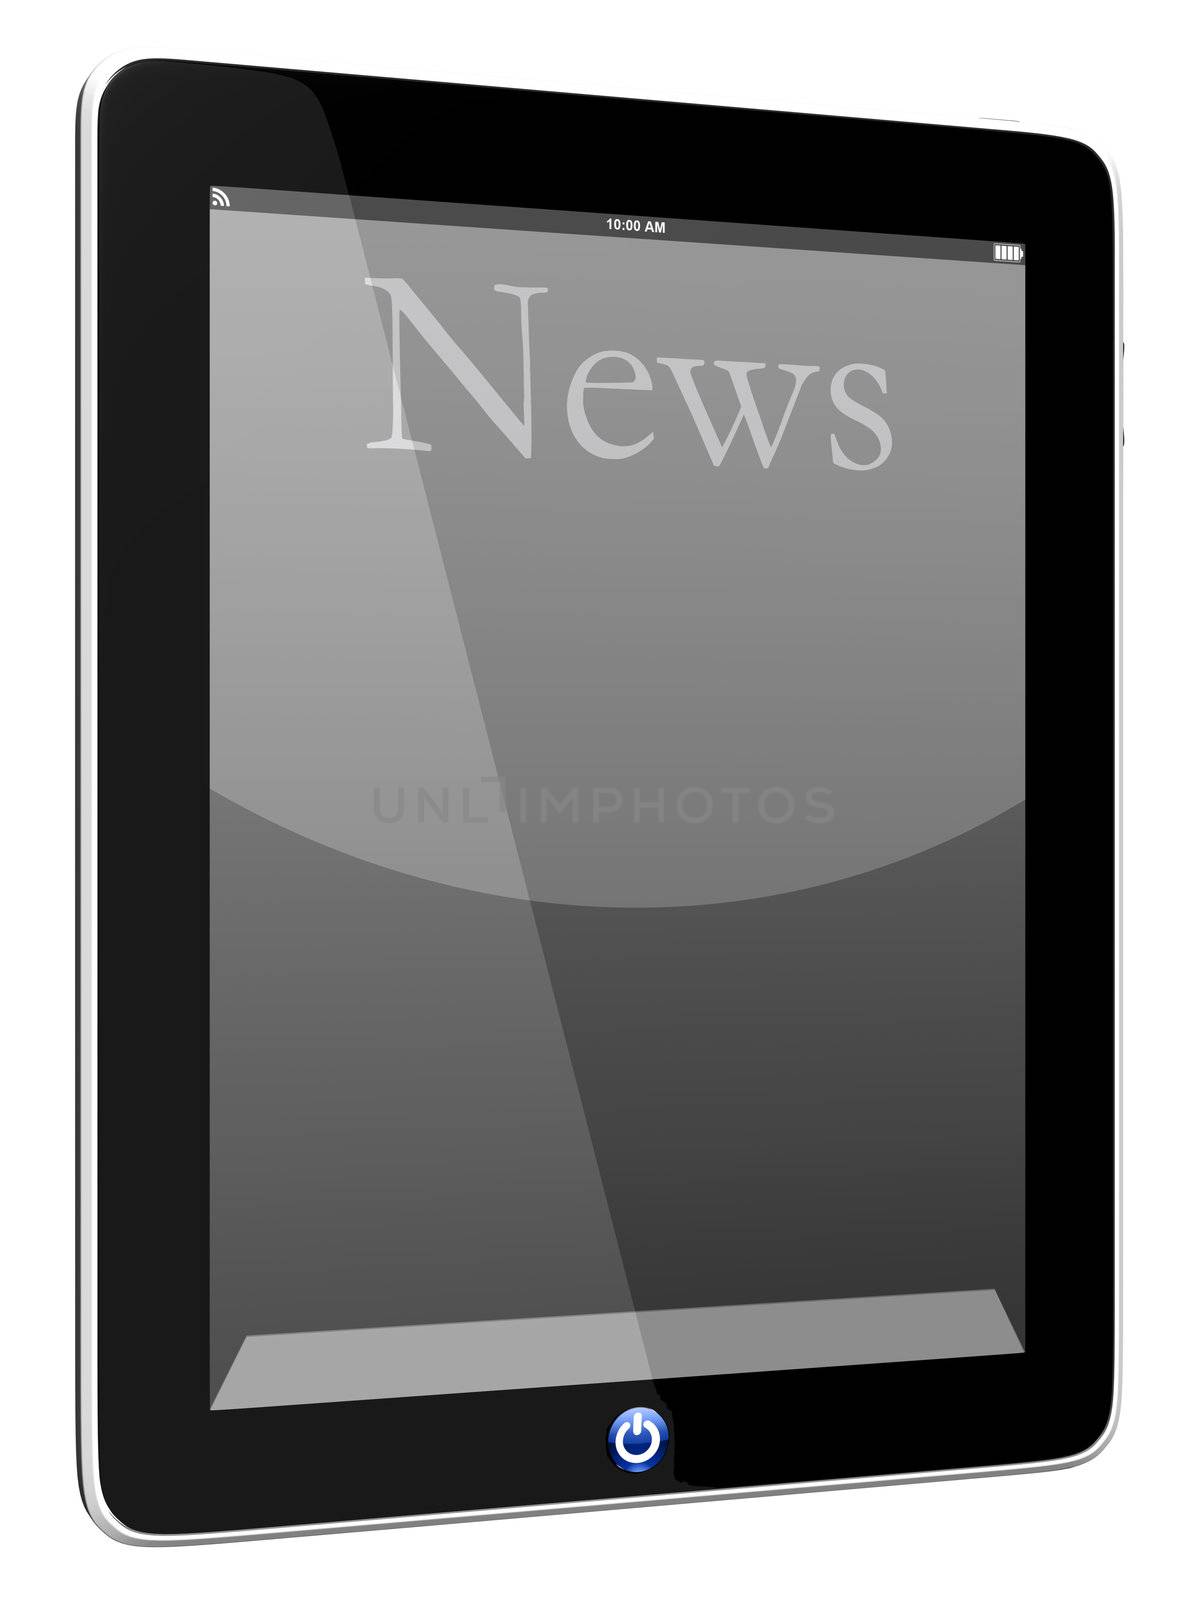 News on Tablet PC Computer by adamr